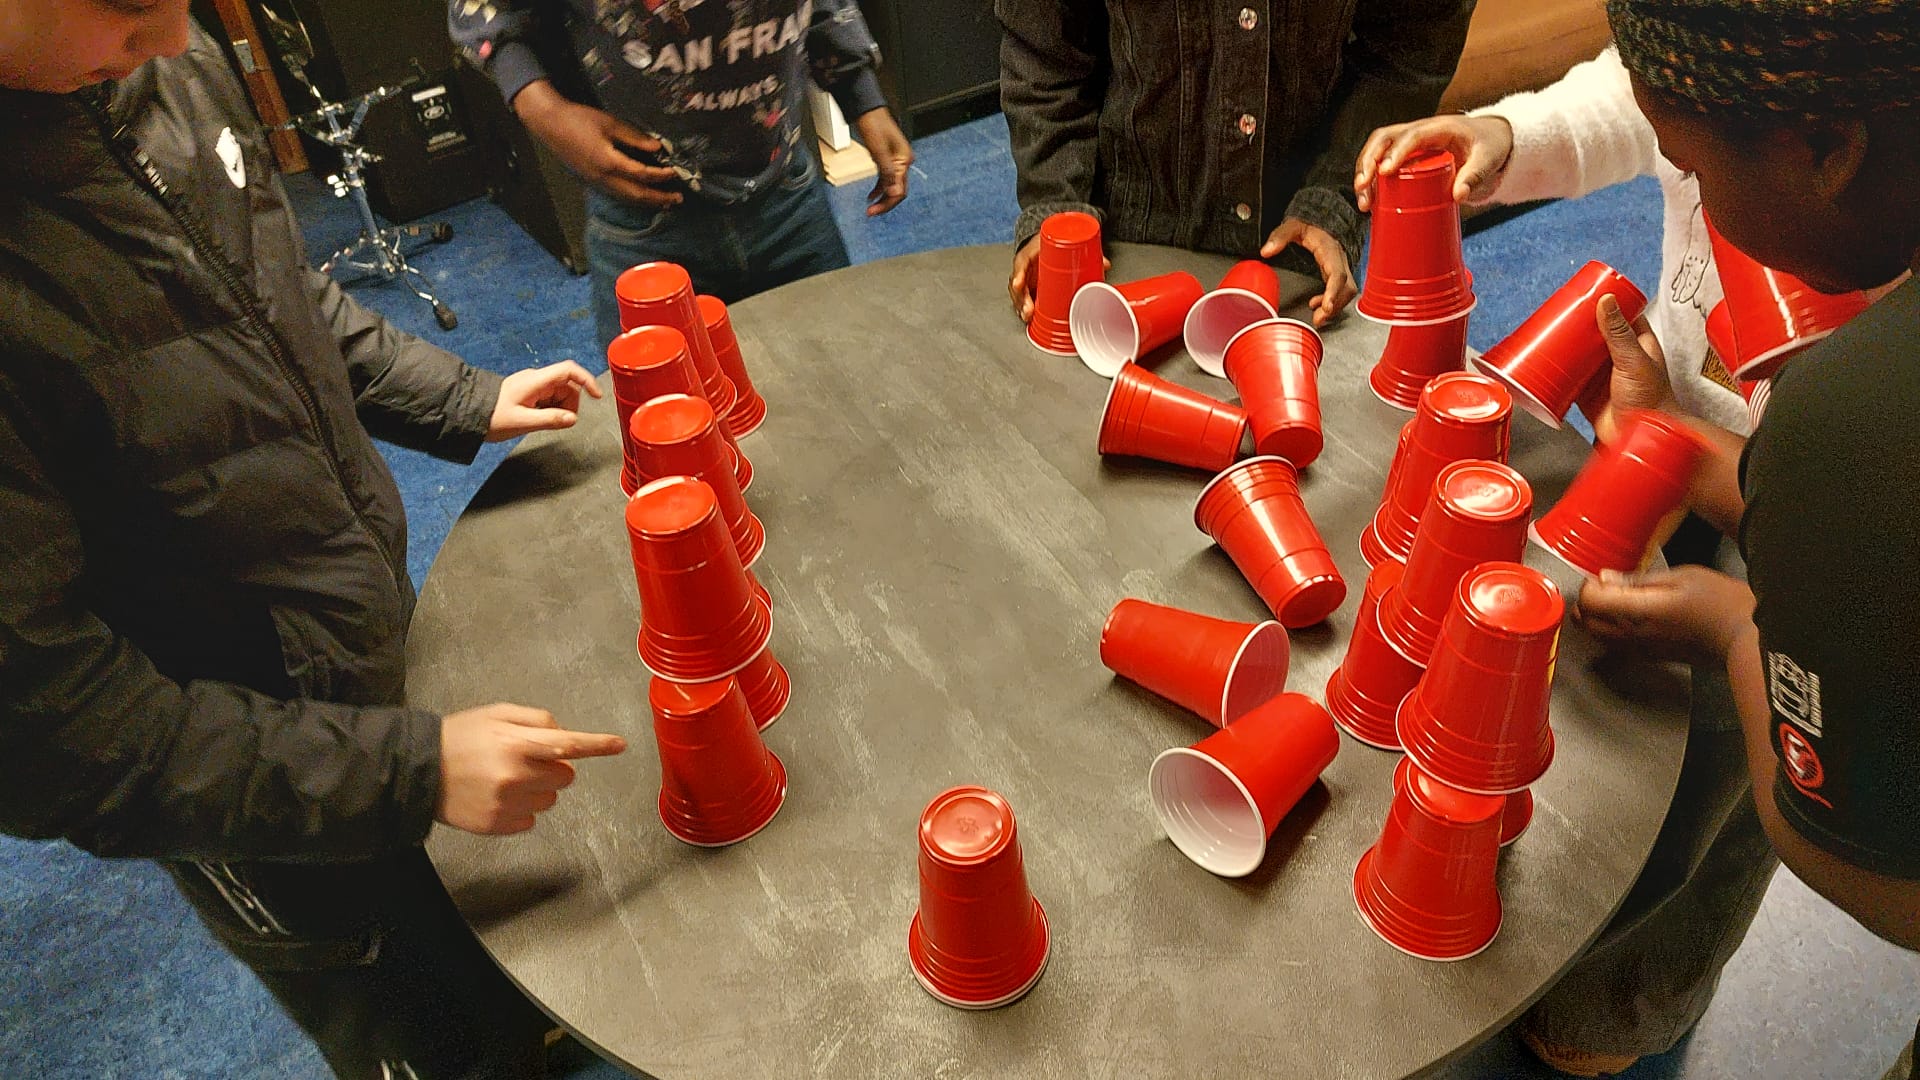 Red cup games